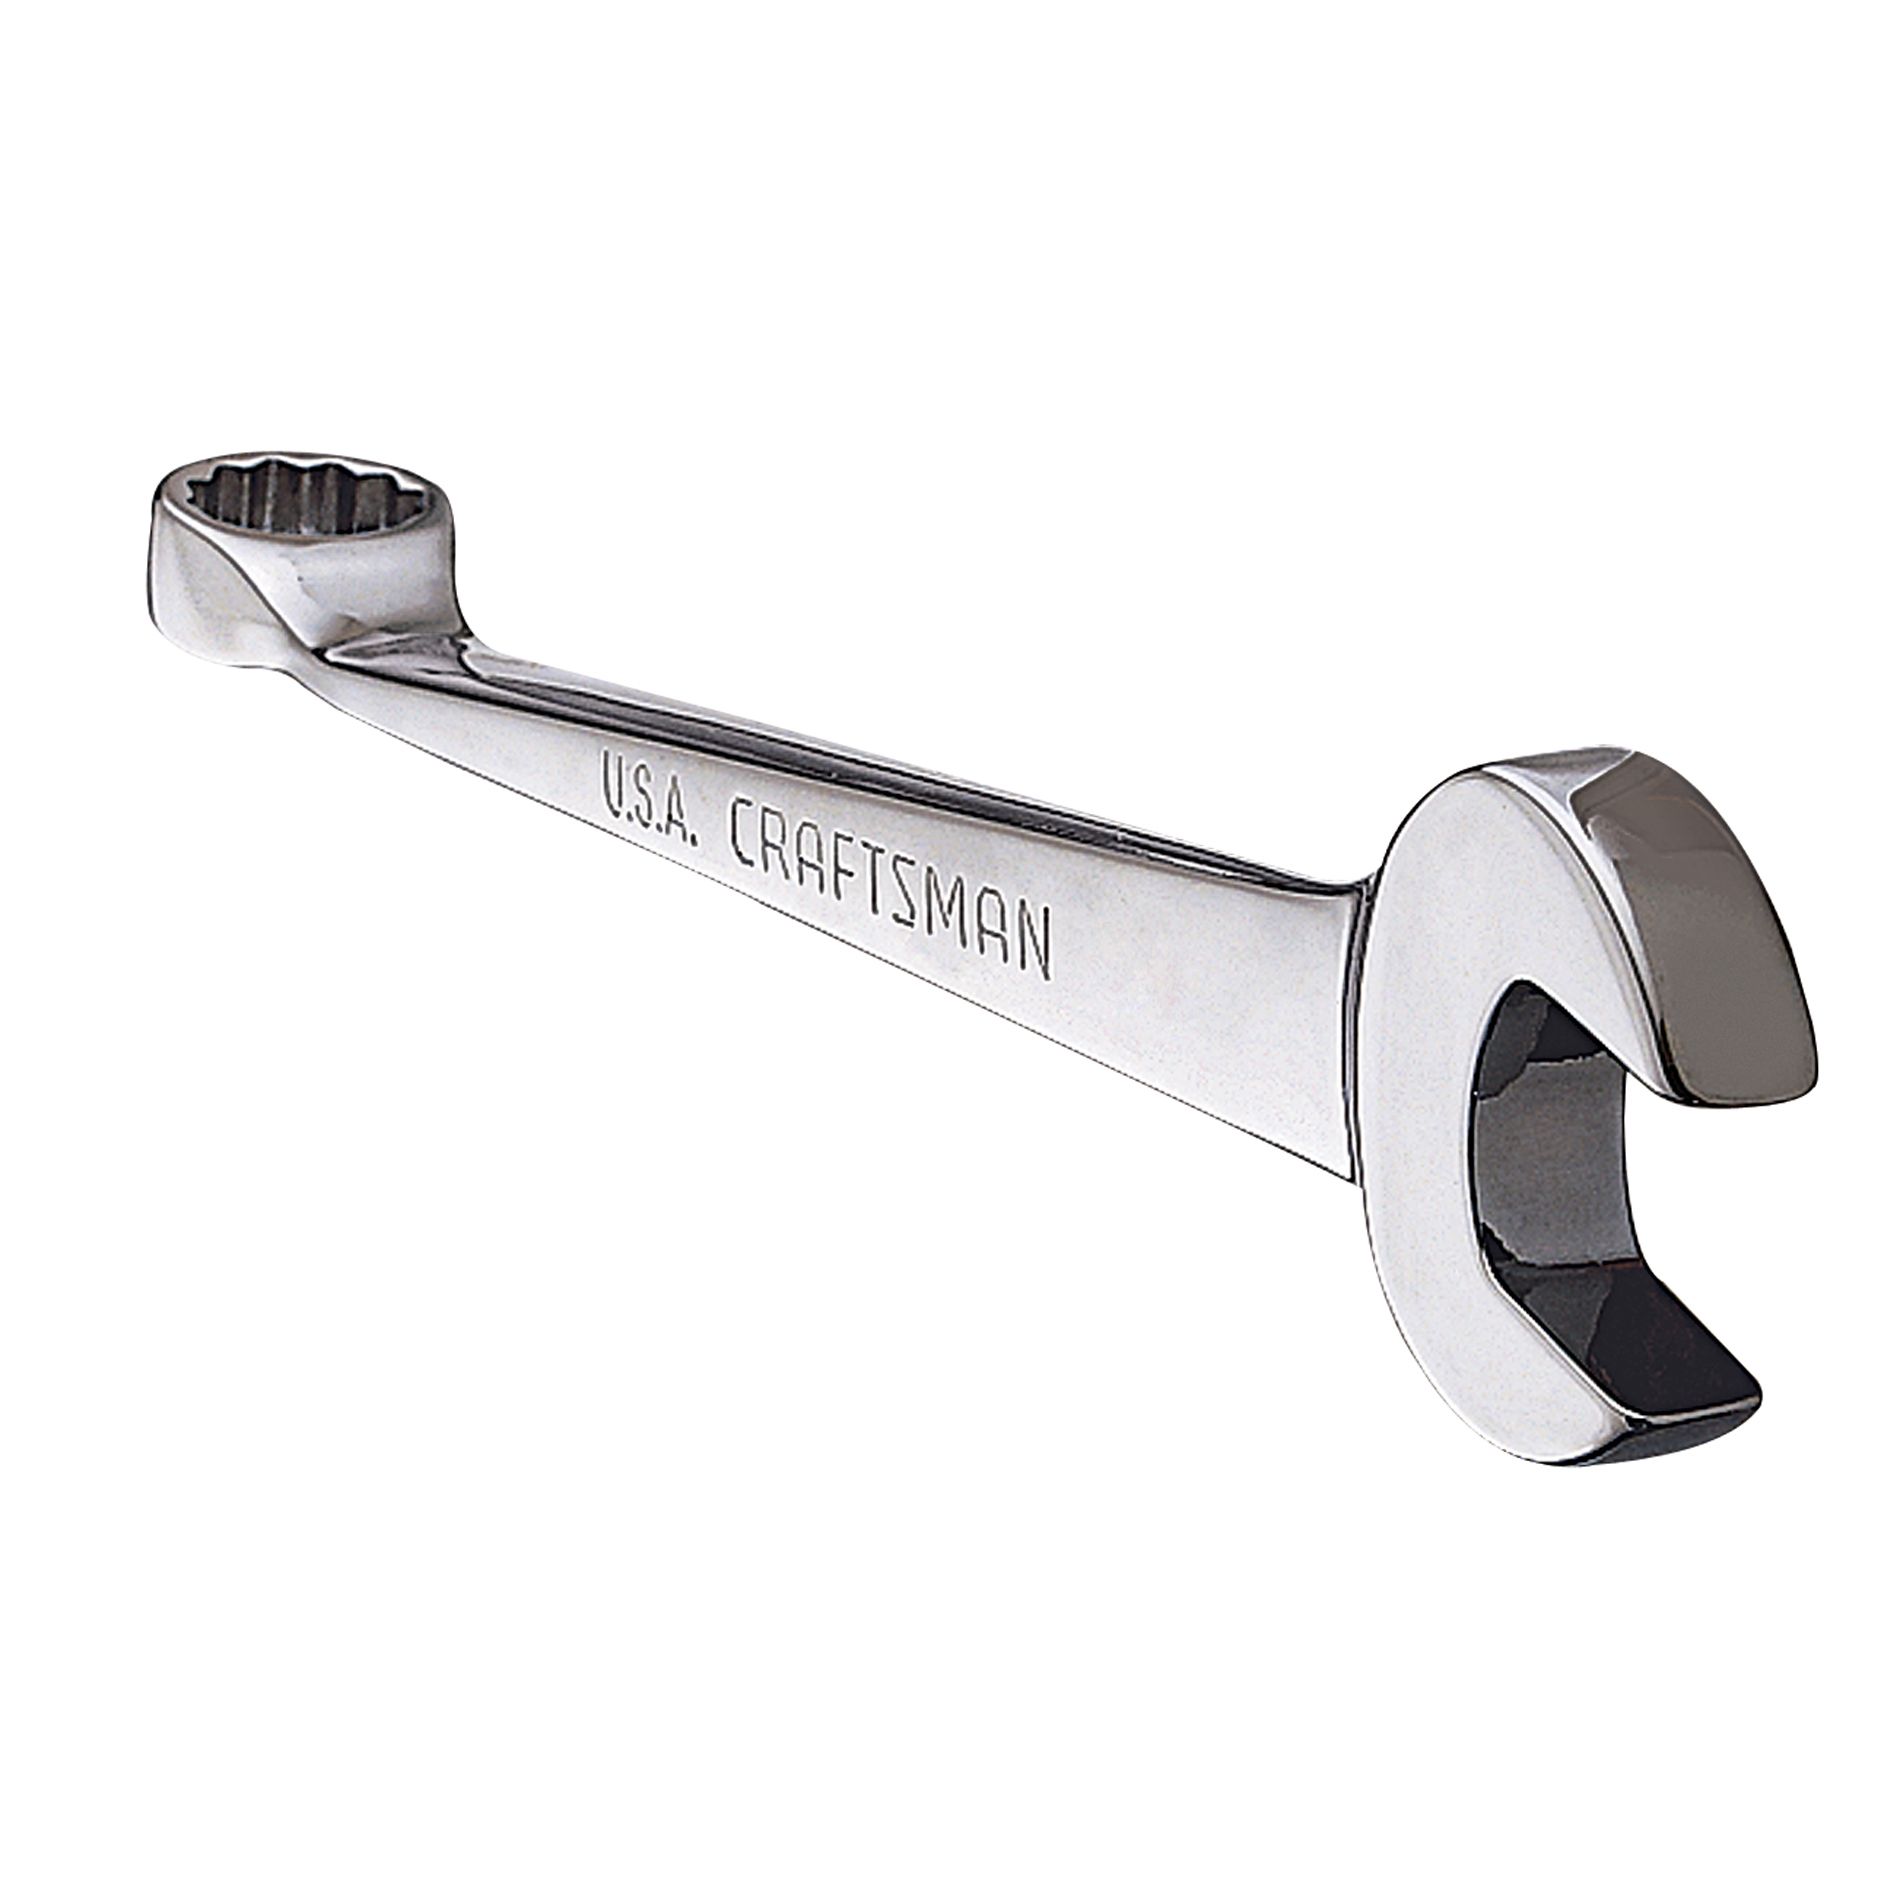 Craftsman 7/16 in. Full Polish Cross-Force&trade; Wrench, 12 pt. Combination